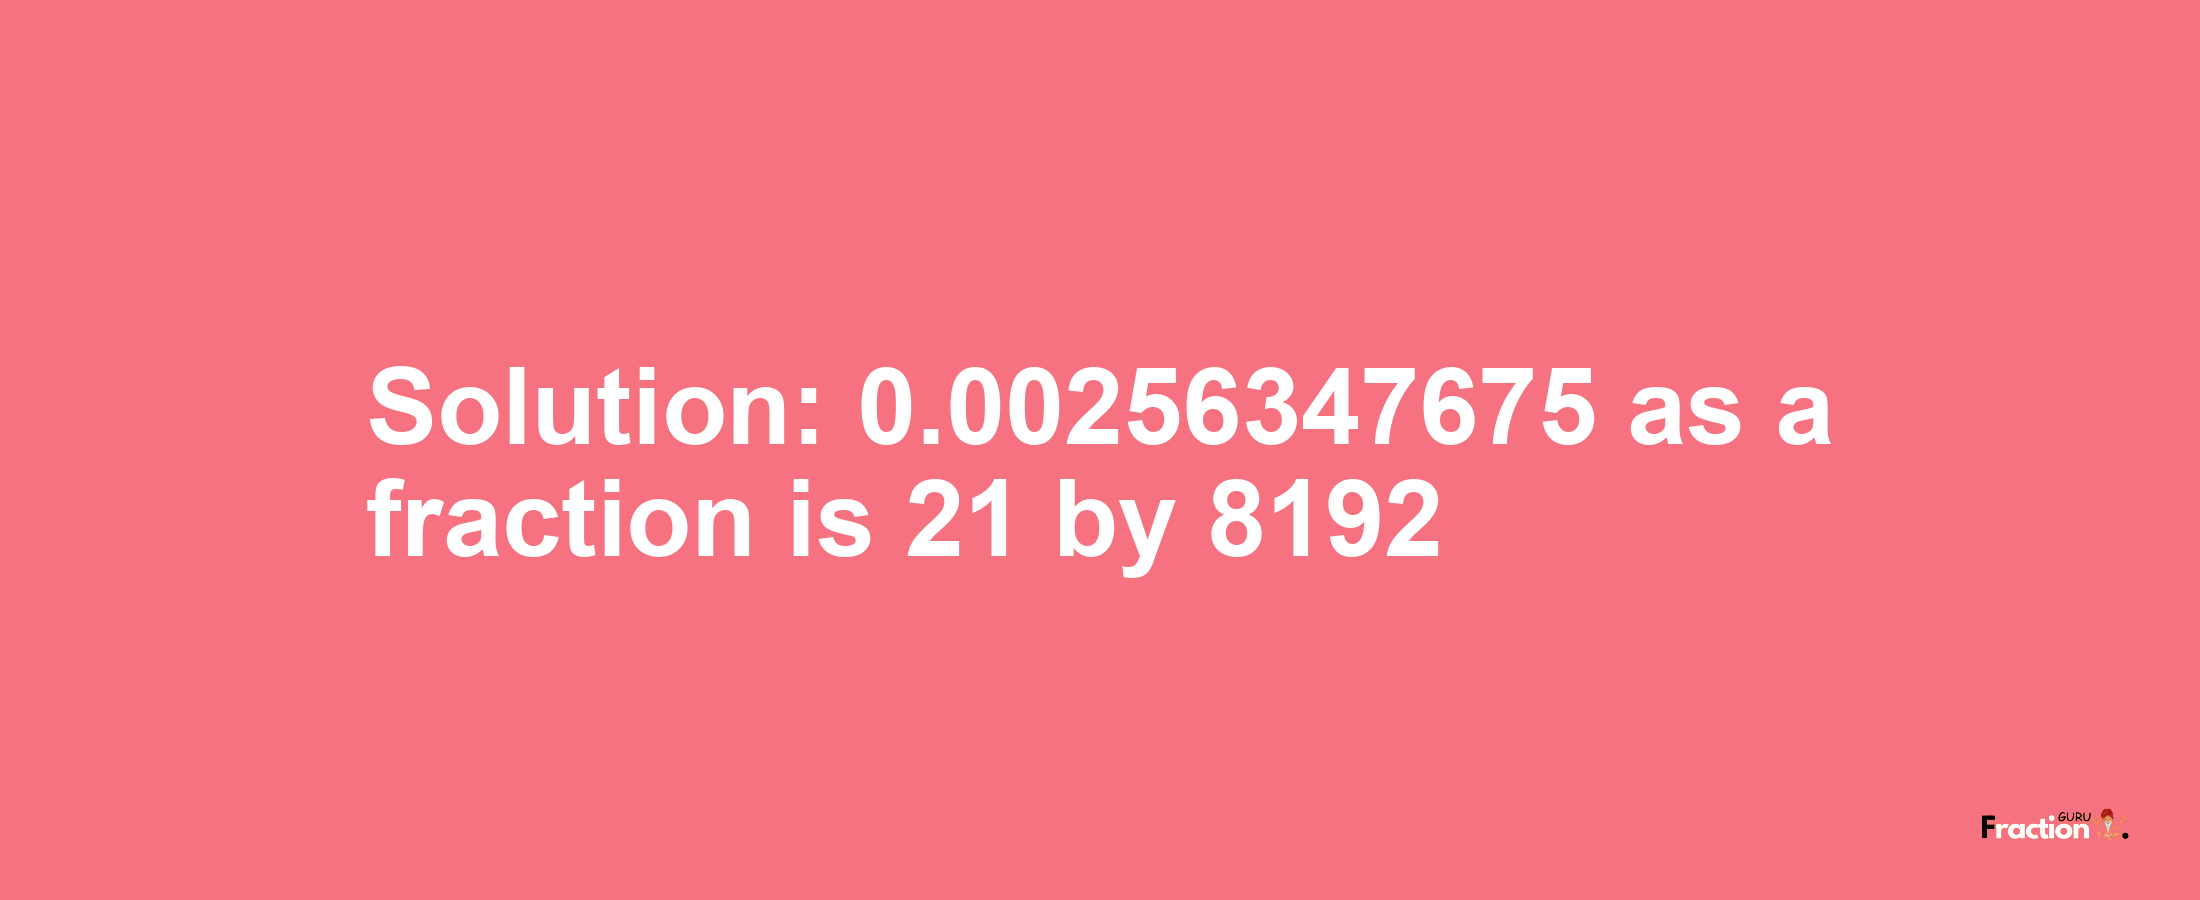 Solution:0.00256347675 as a fraction is 21/8192